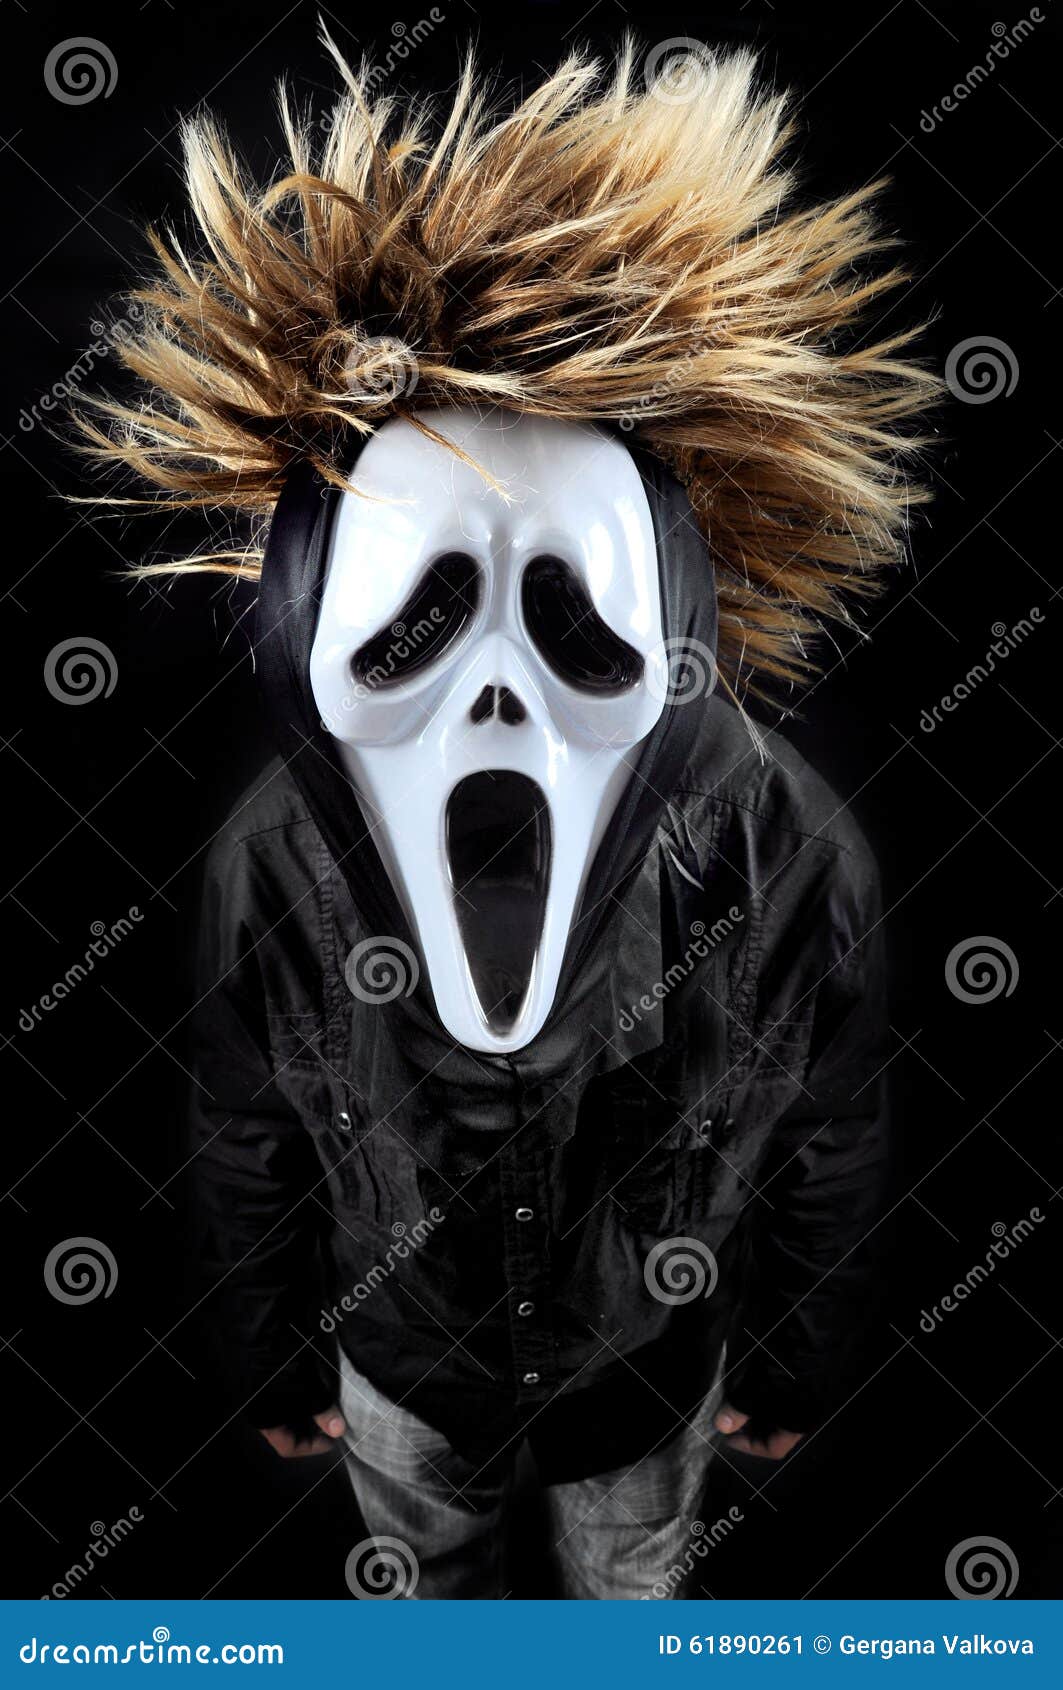 Scary face mask stock image. Image of night, evil, face - 61890261